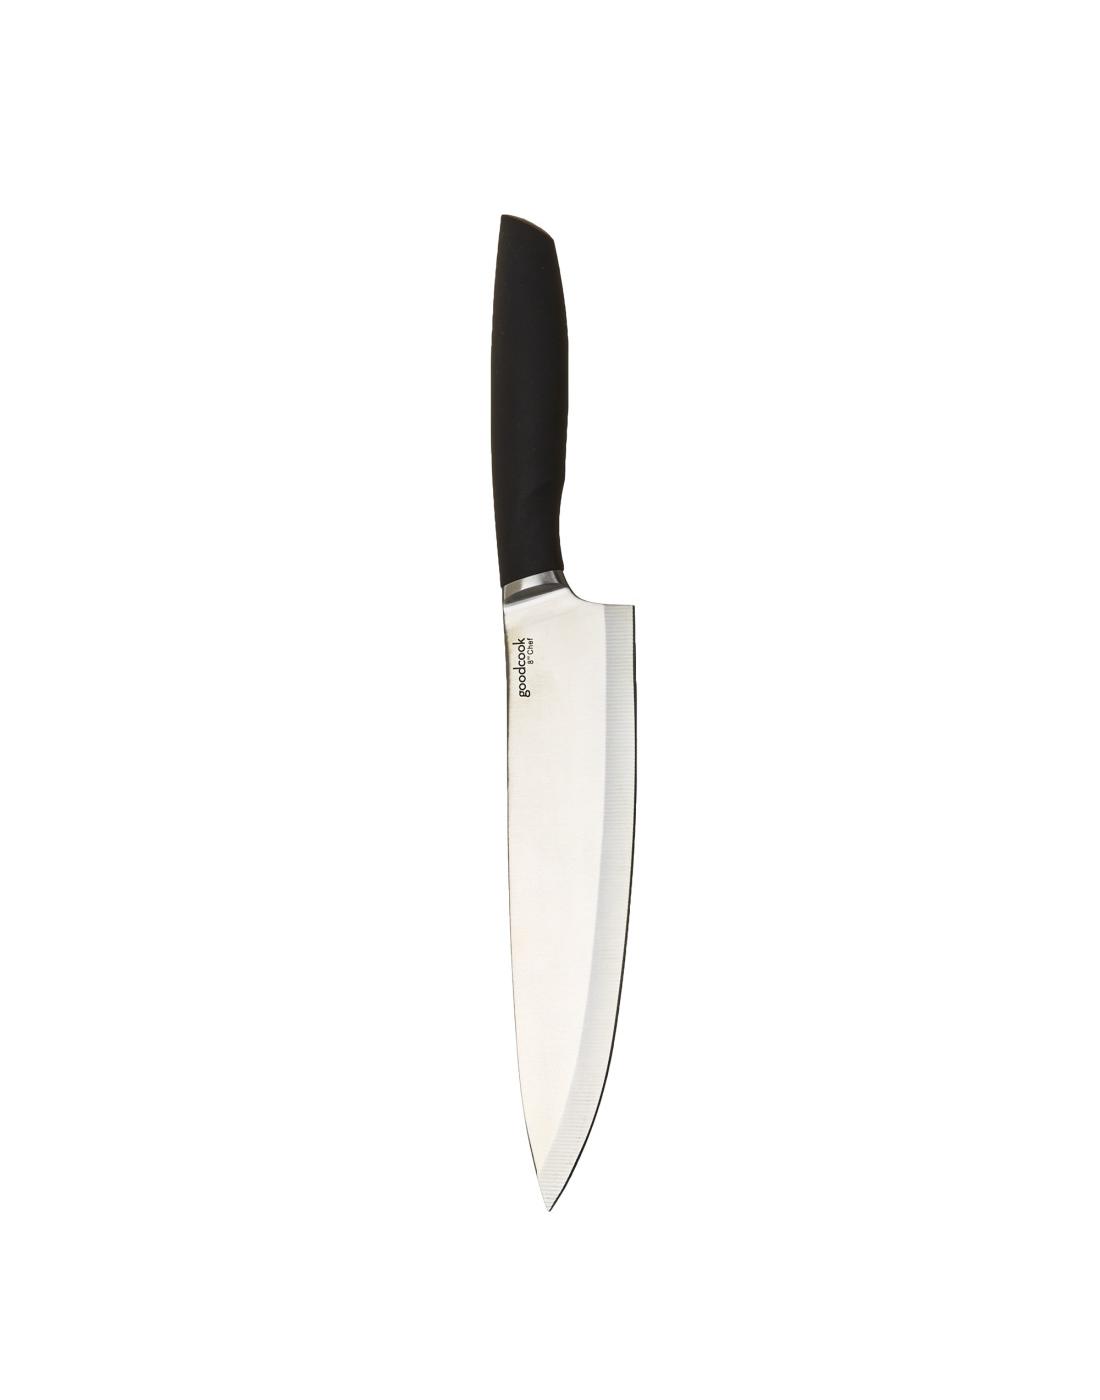 GoodCook Touch Chef's Knife; image 2 of 4